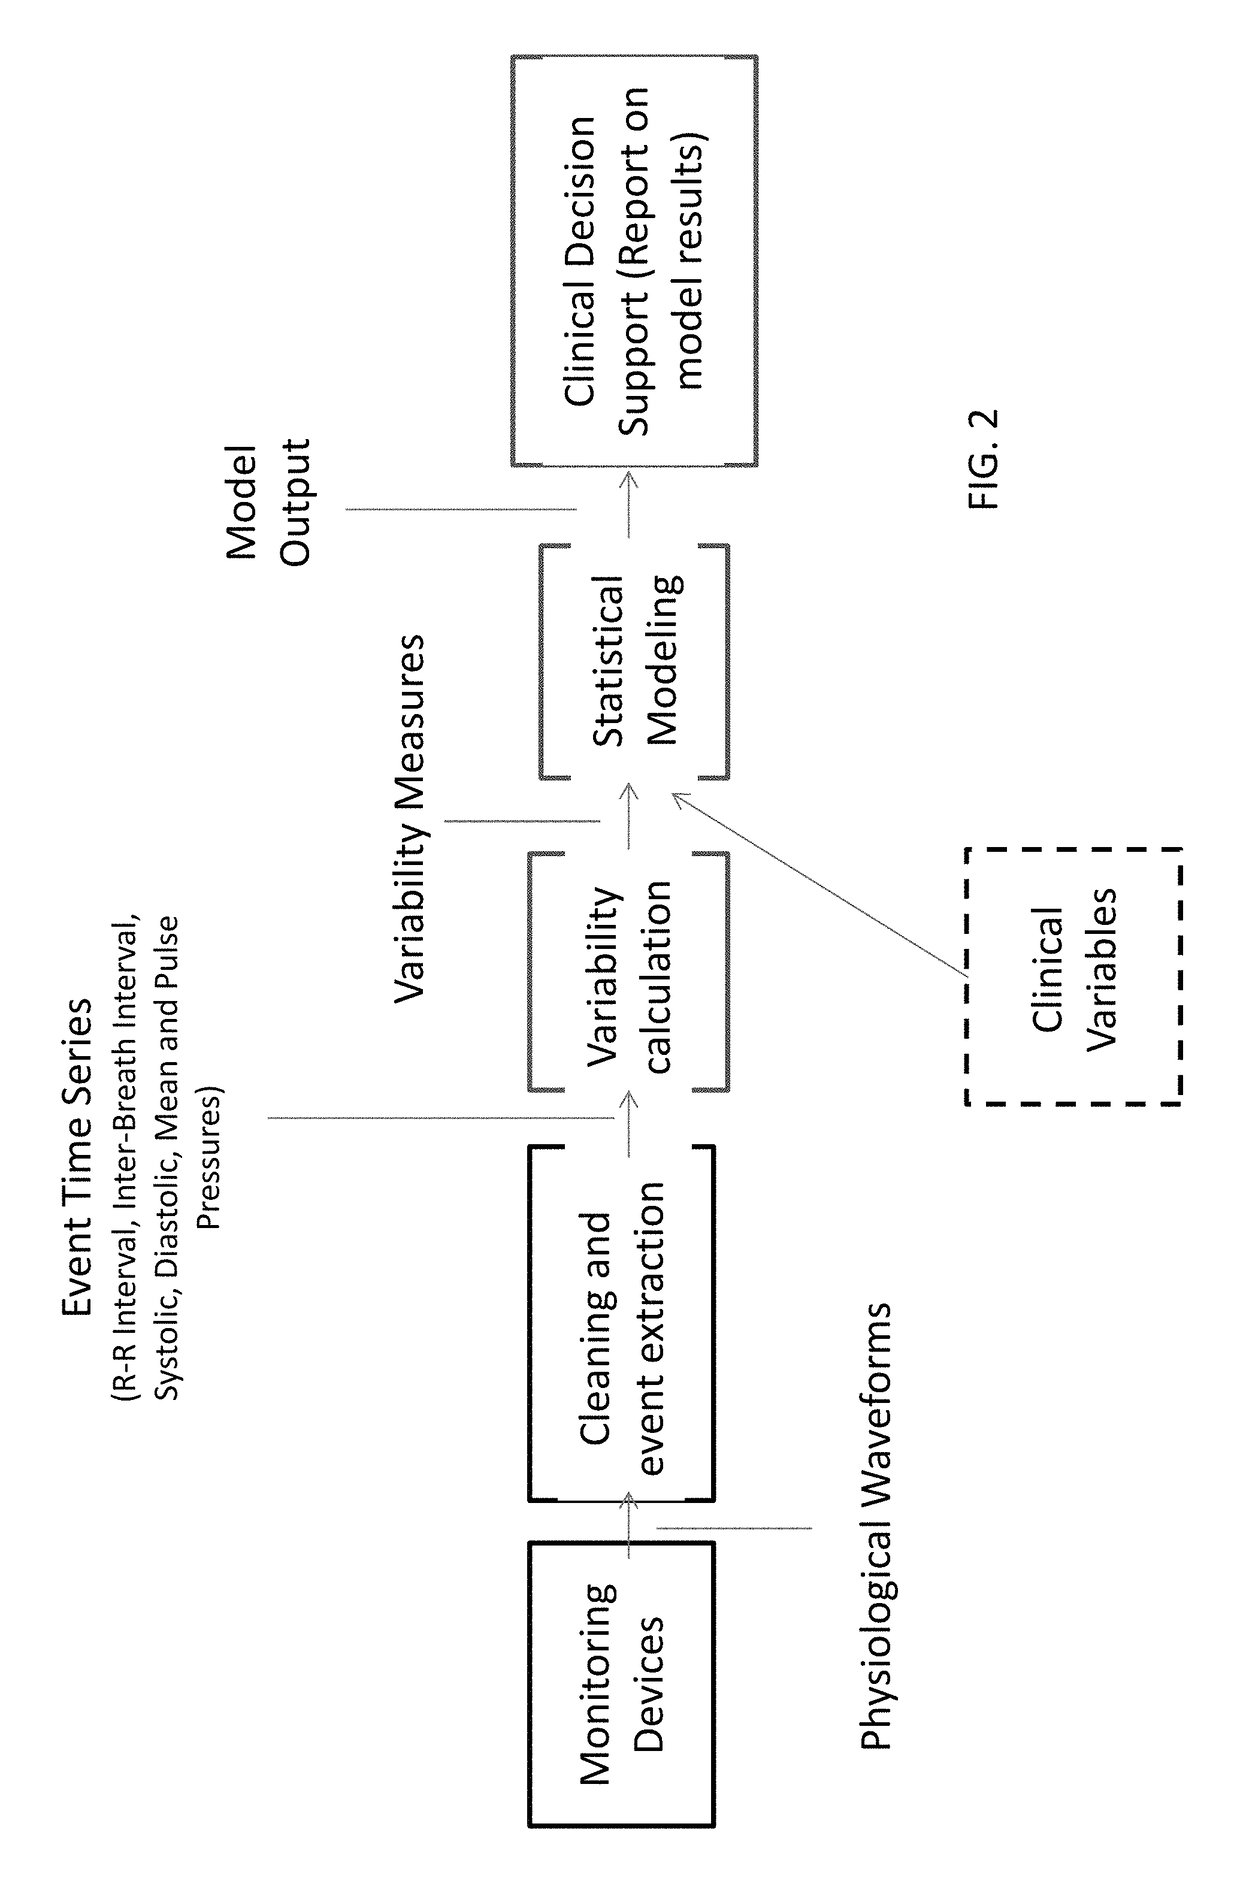 System and method for assisting decisions associated with events relative to withdrawal of life-sustaining therapy using variability measurements